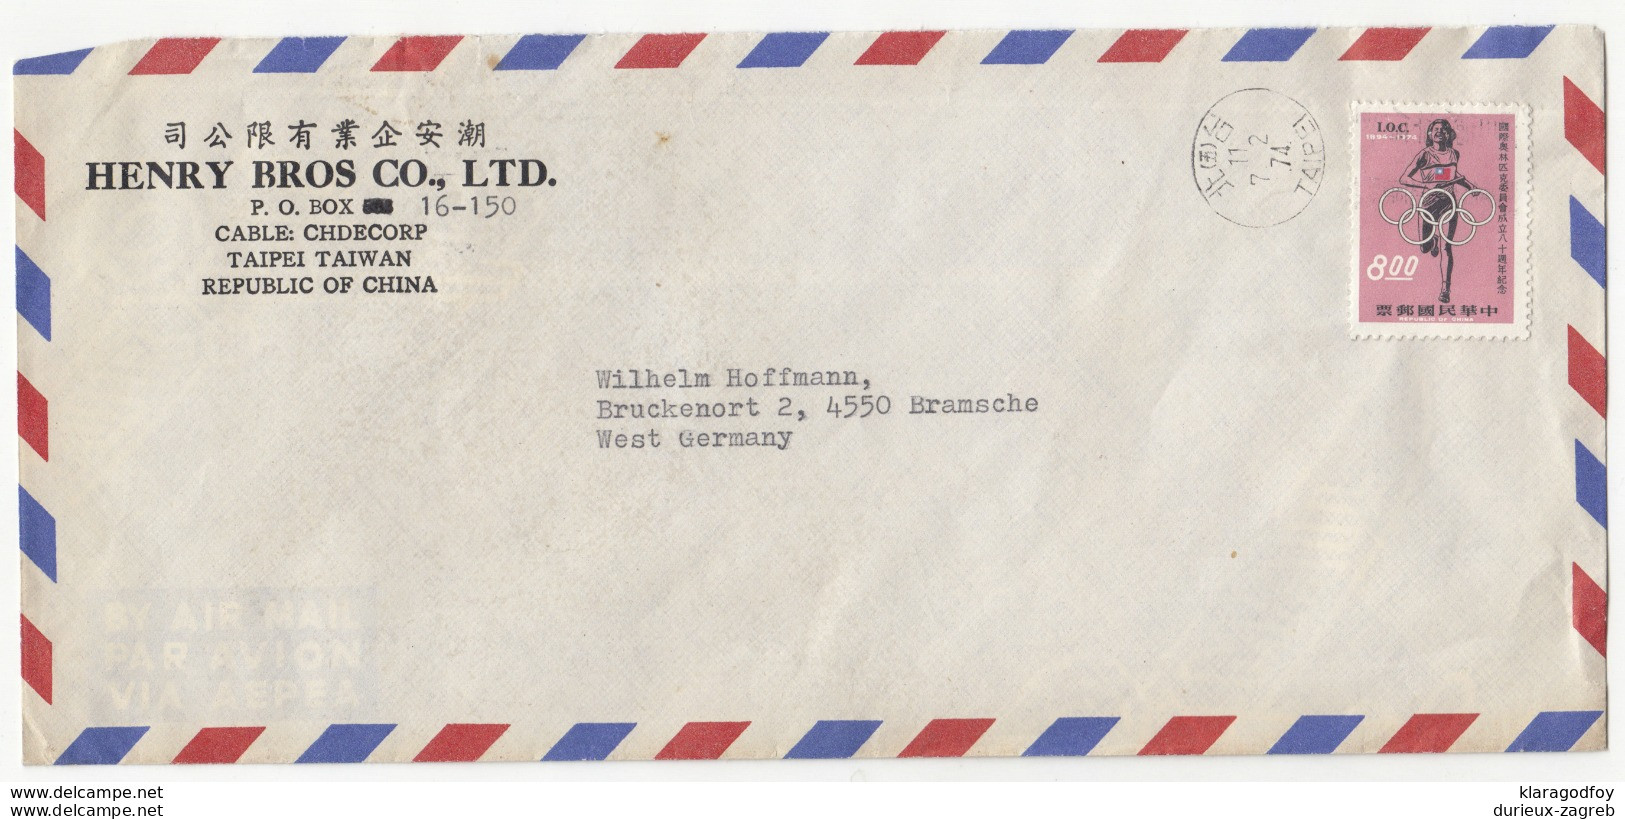 Henry Bros Co. Taipei Company Air Mail Letter Cover Travelled 1974 To Germany  B190920 - Storia Postale